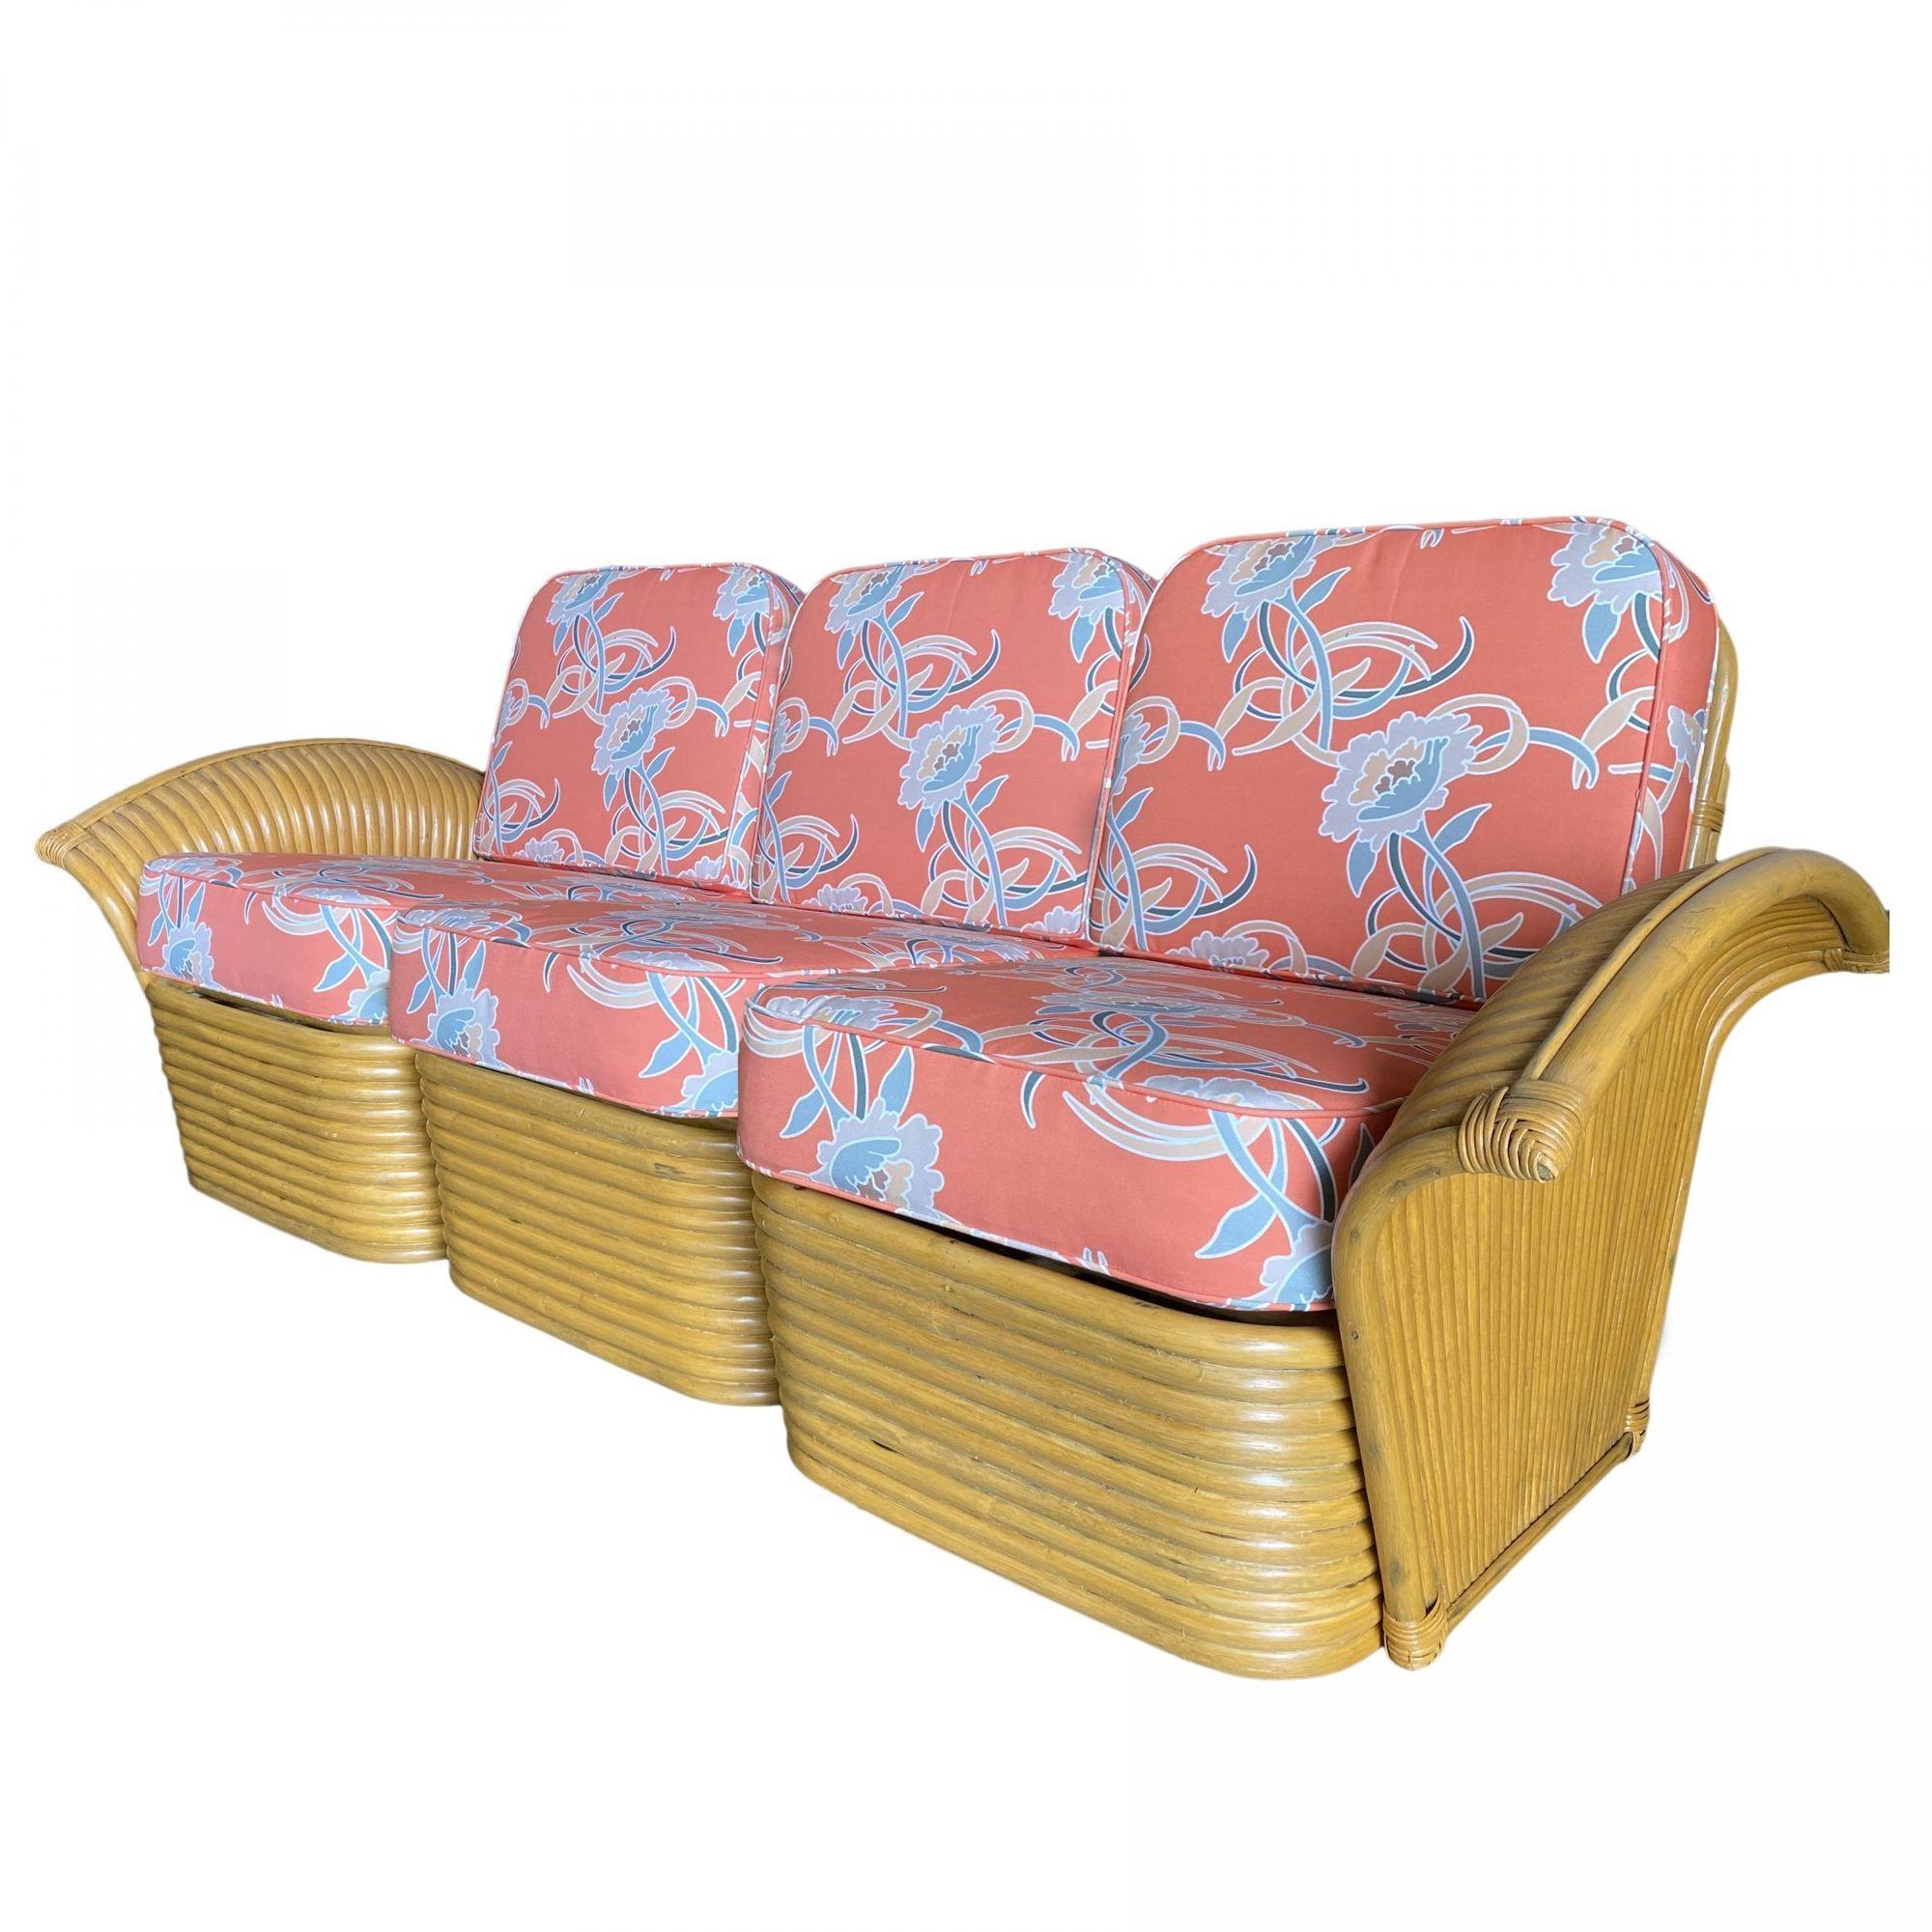 Rattan Fan 3 seat sofa with the same fabric as seen in the original 